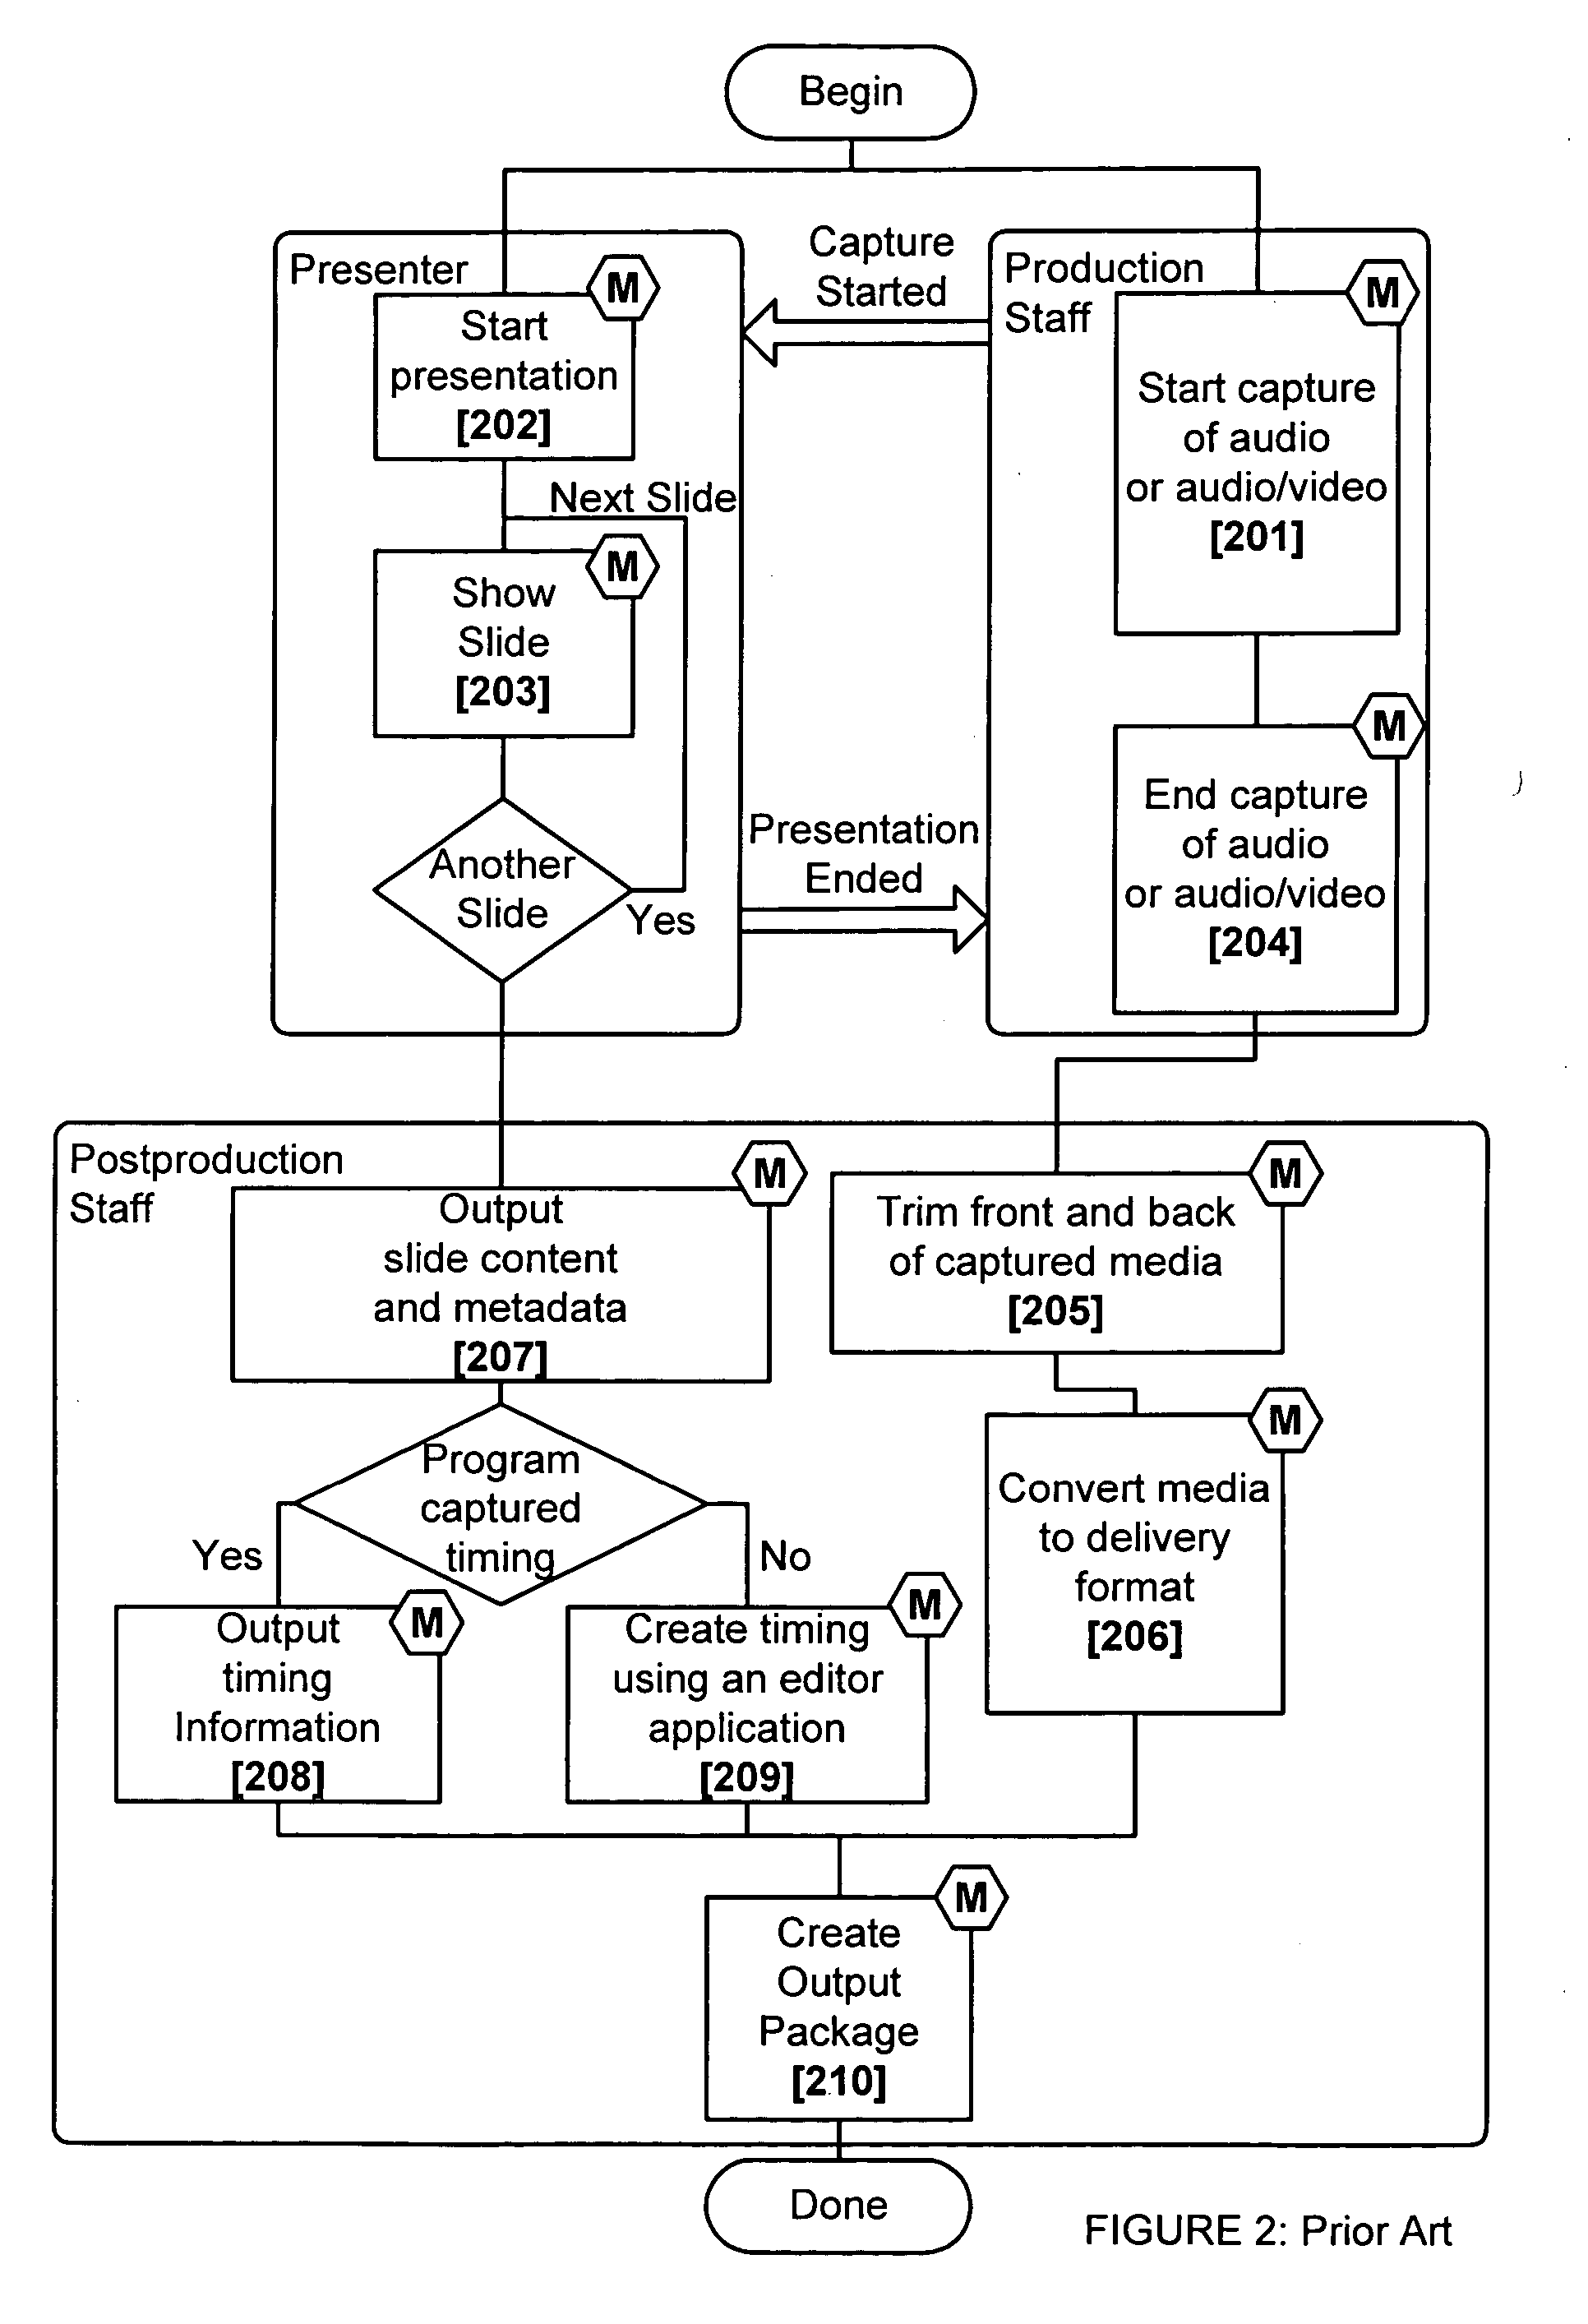 Method for capturing, encoding, packaging, and distributing multimedia presentations